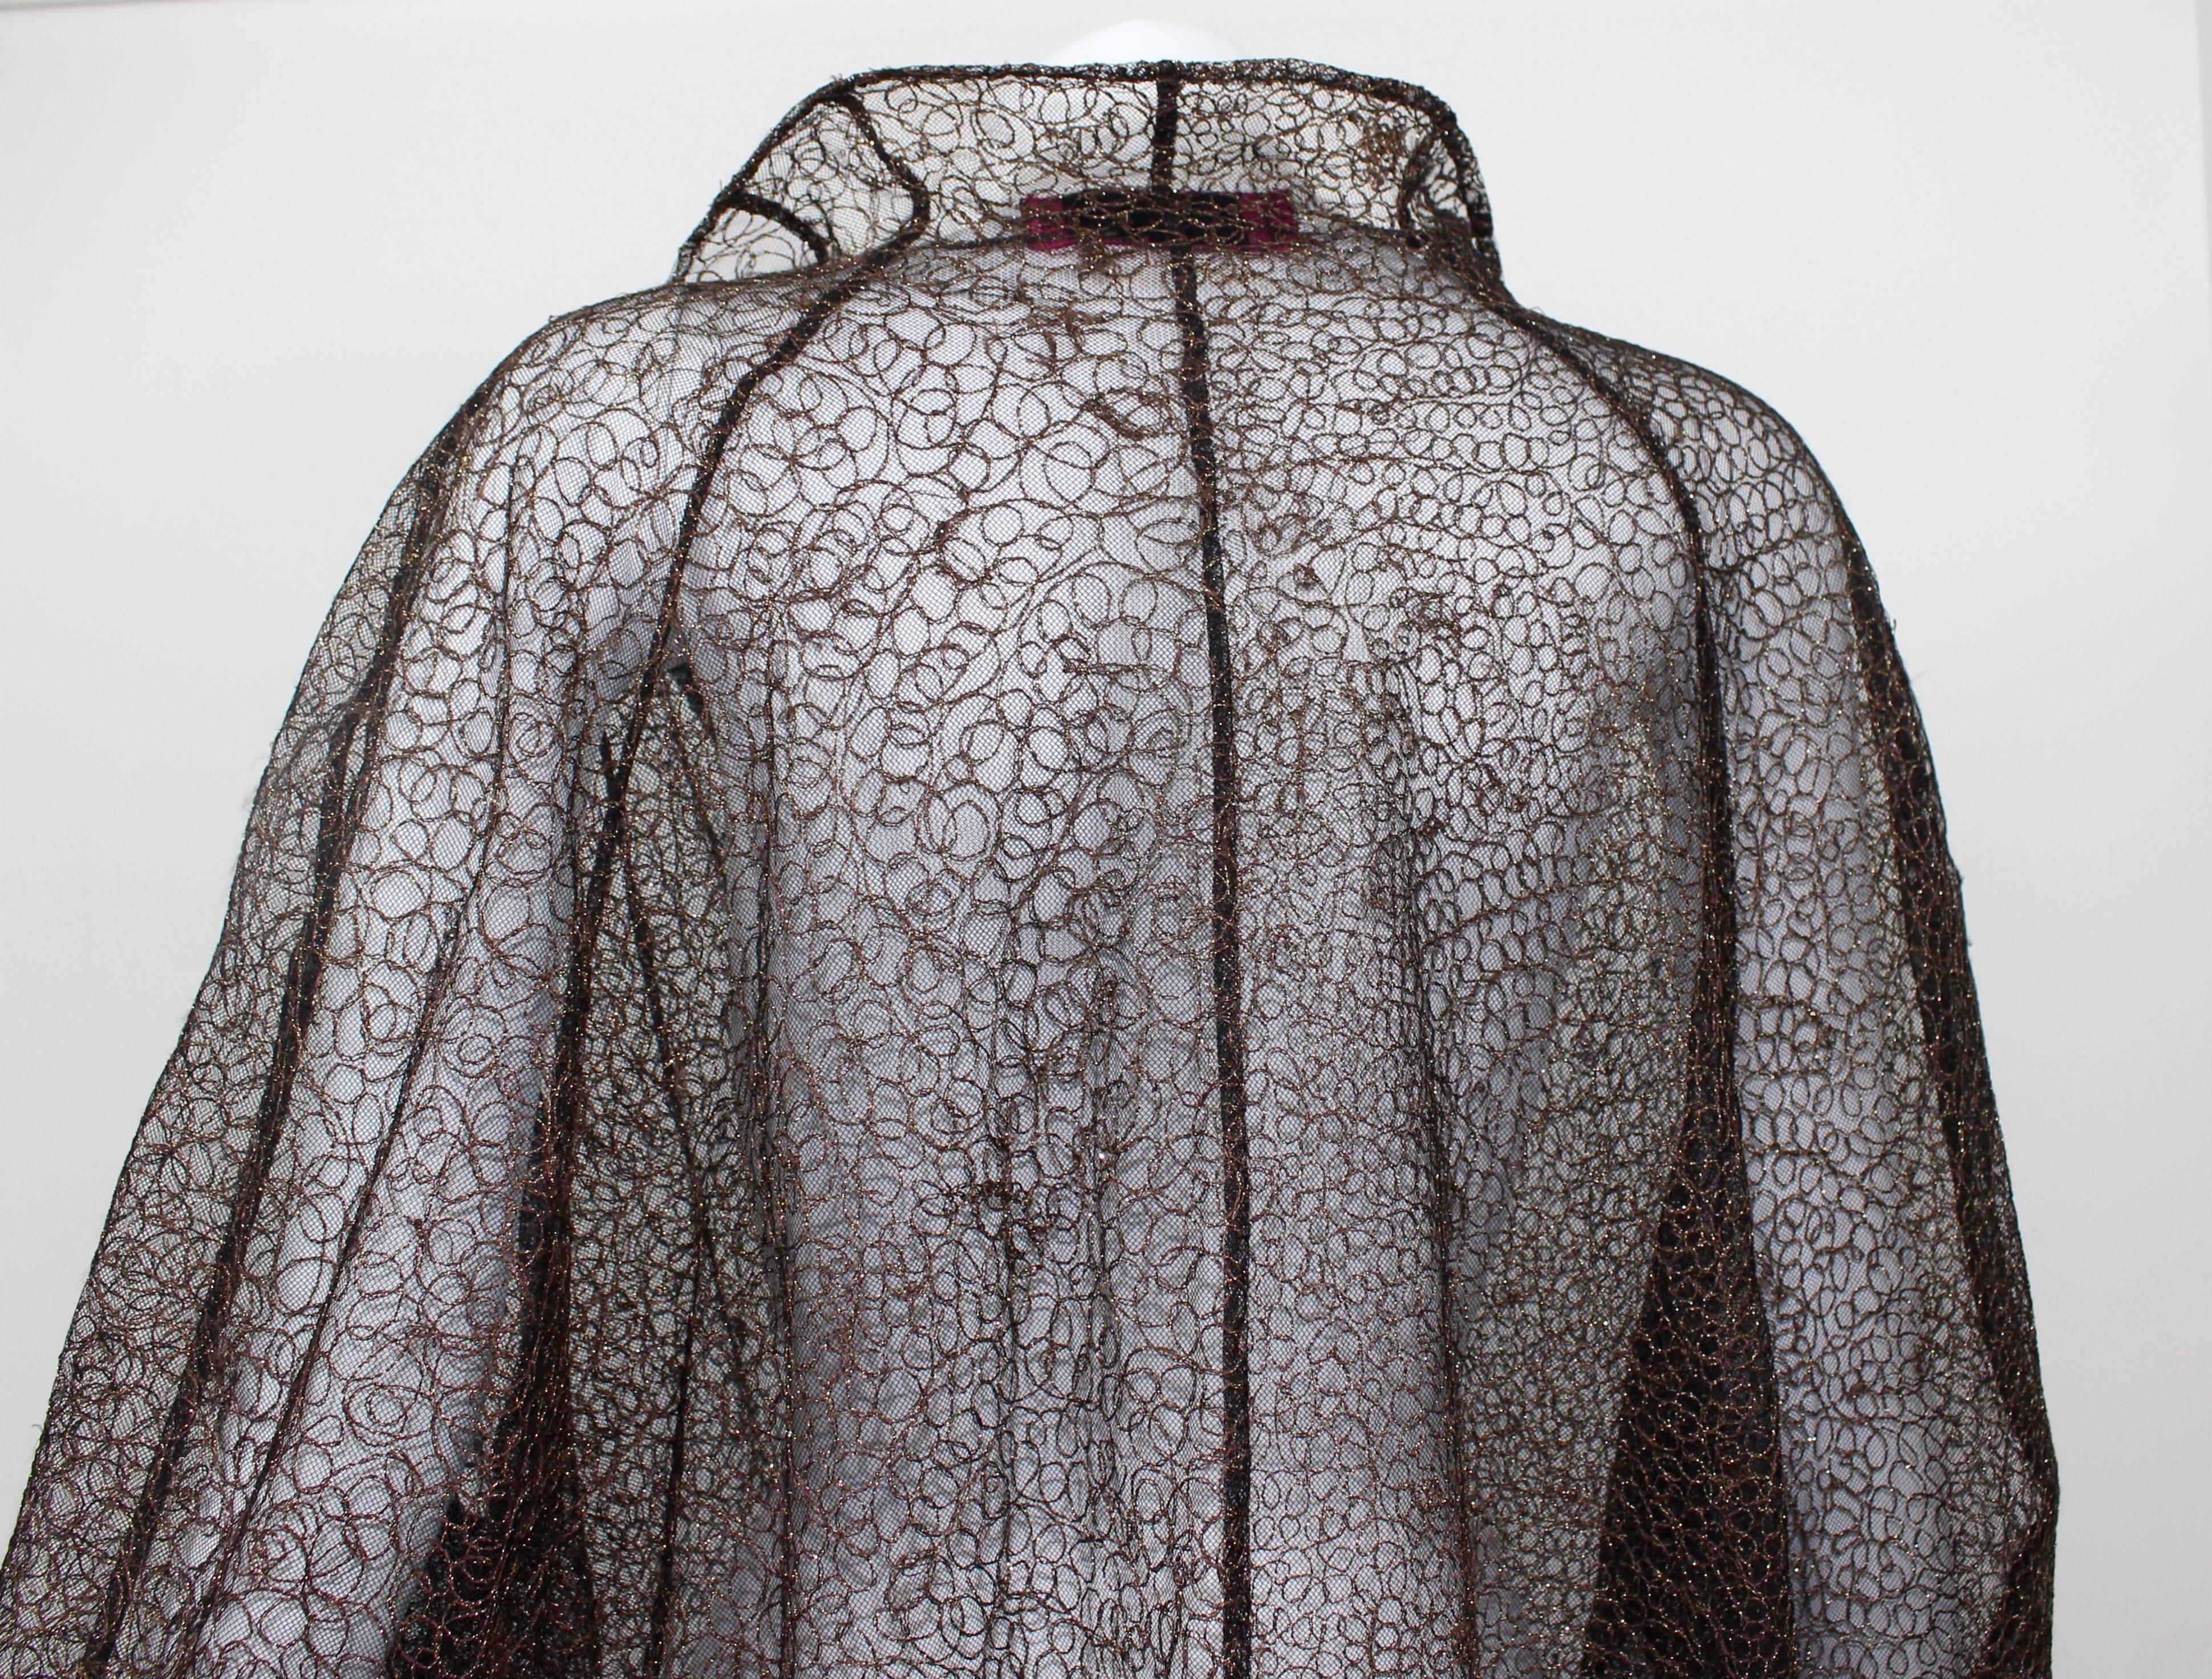 Gray Christian Lacroix Sheer Copper Metallic Lace Jacket/ Duster